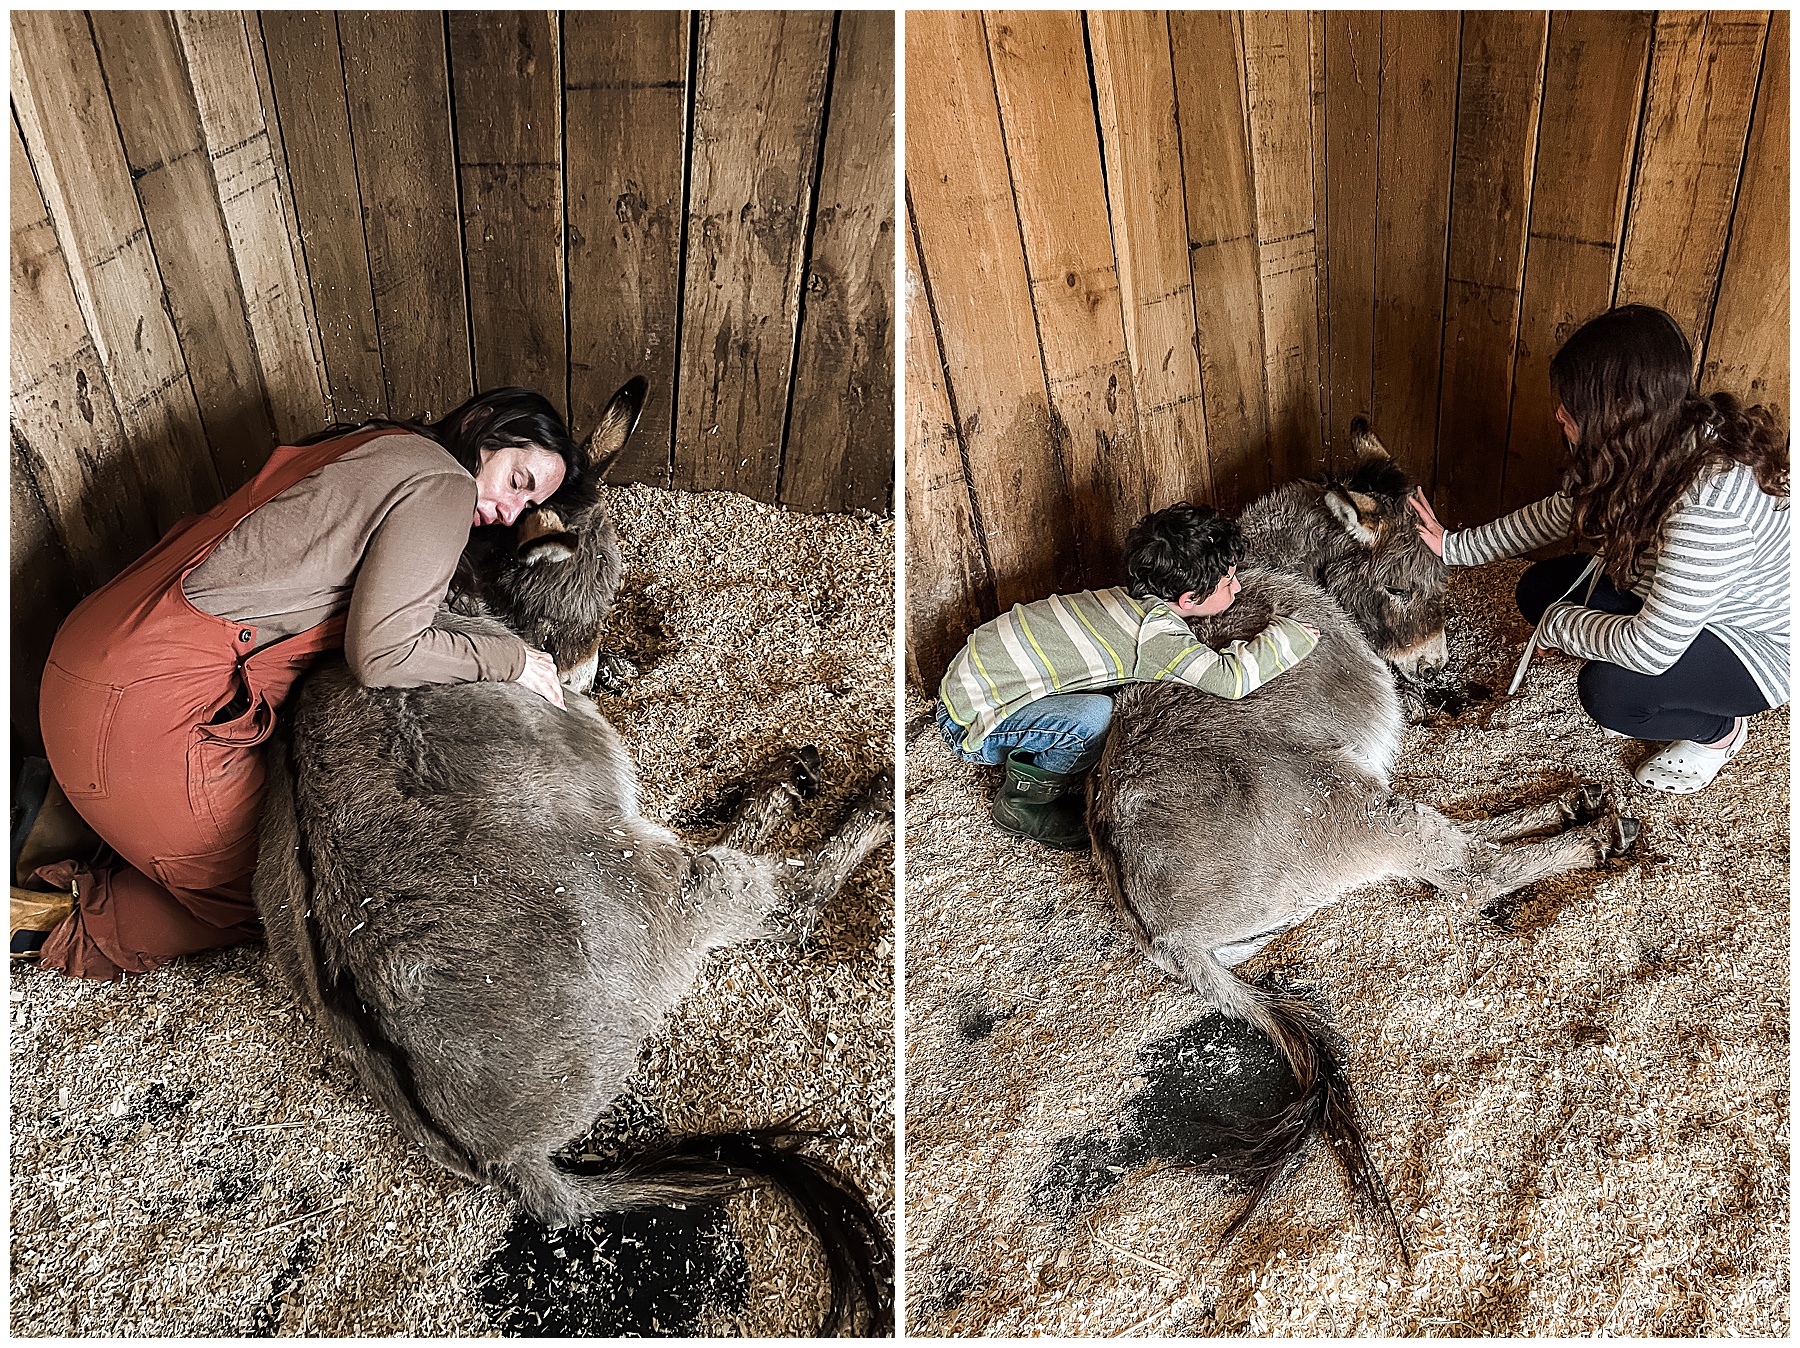 Donkey with colic - Sugar Maple Weekly Updates